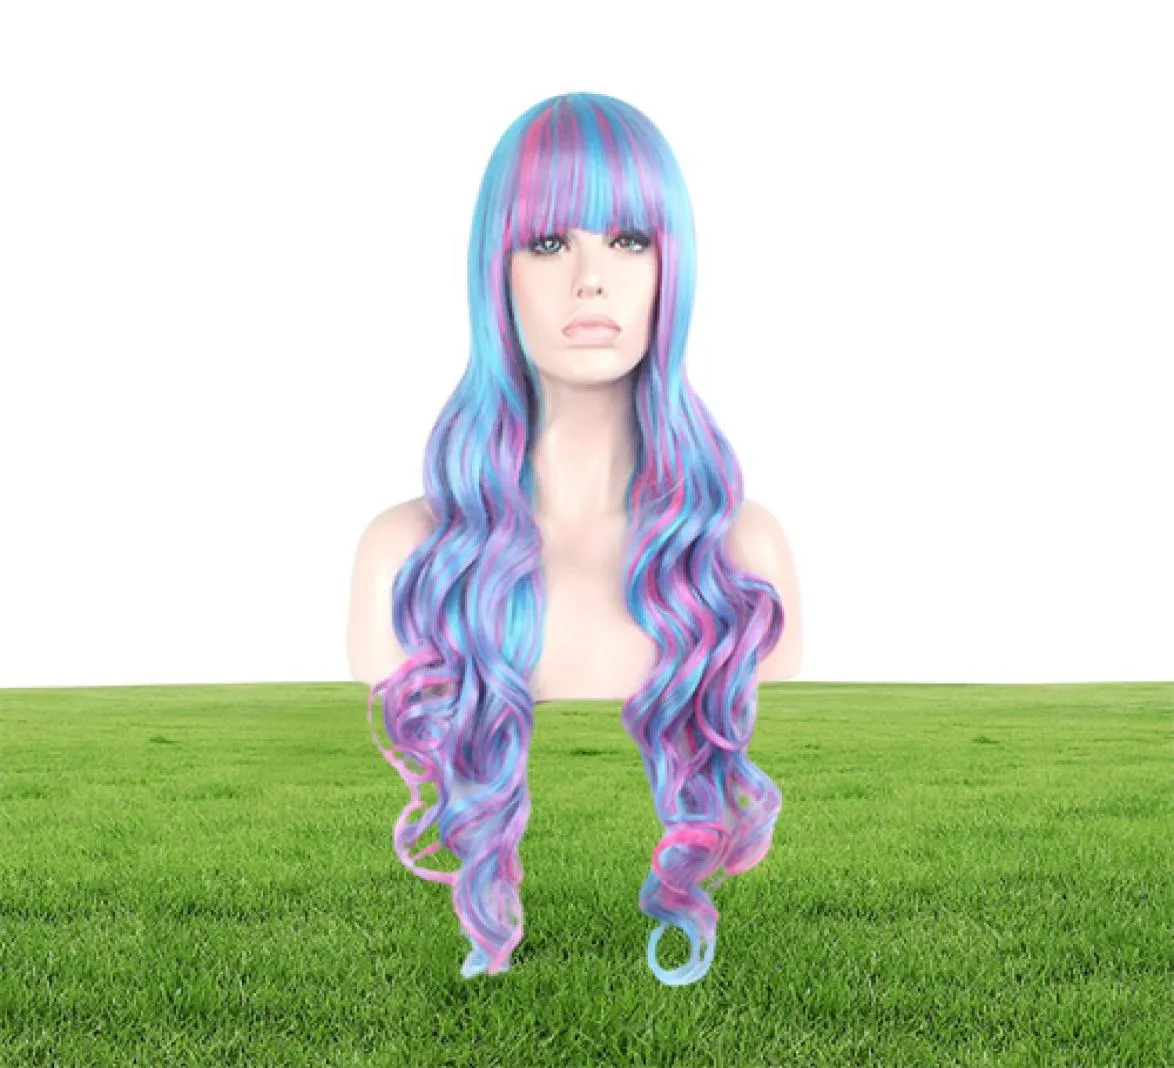 Woodfestival Long Curly Wig Ombre Syntetic Fiber Hair Wigs Blue Pink Mix Color Lolita Wig Cosplay Women Bangs 80cm2692211